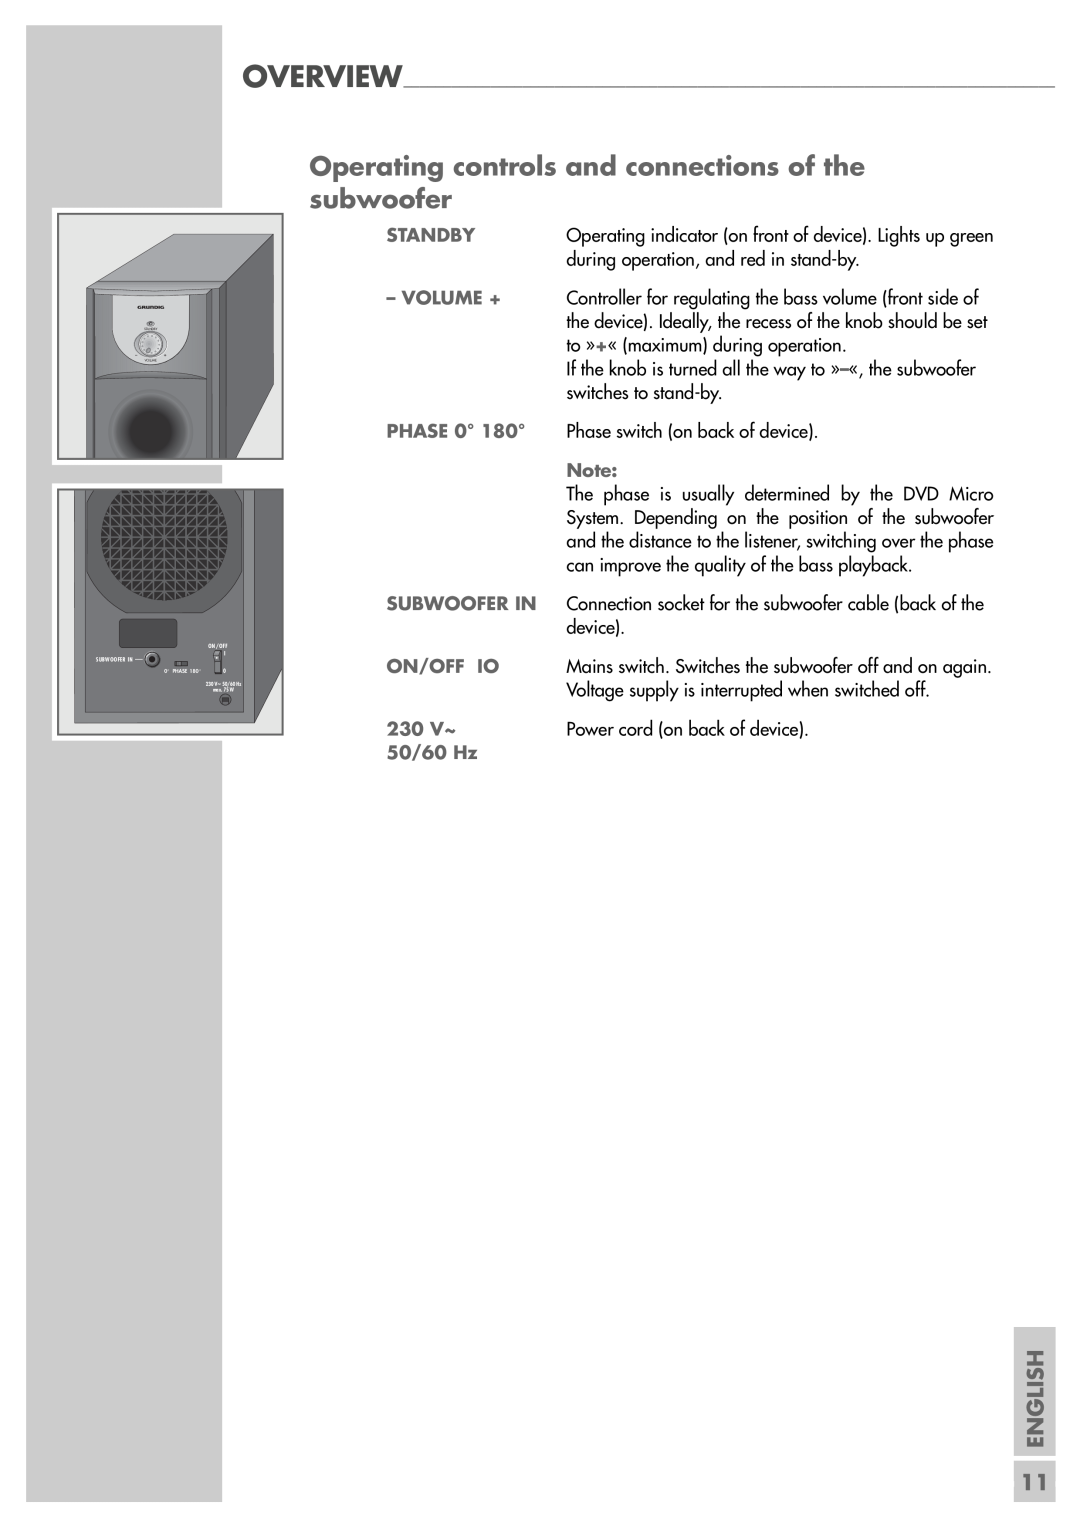 Grundig Scenos UMS 4400 DVD manual Operating controls and connections of the subwoofer, English 